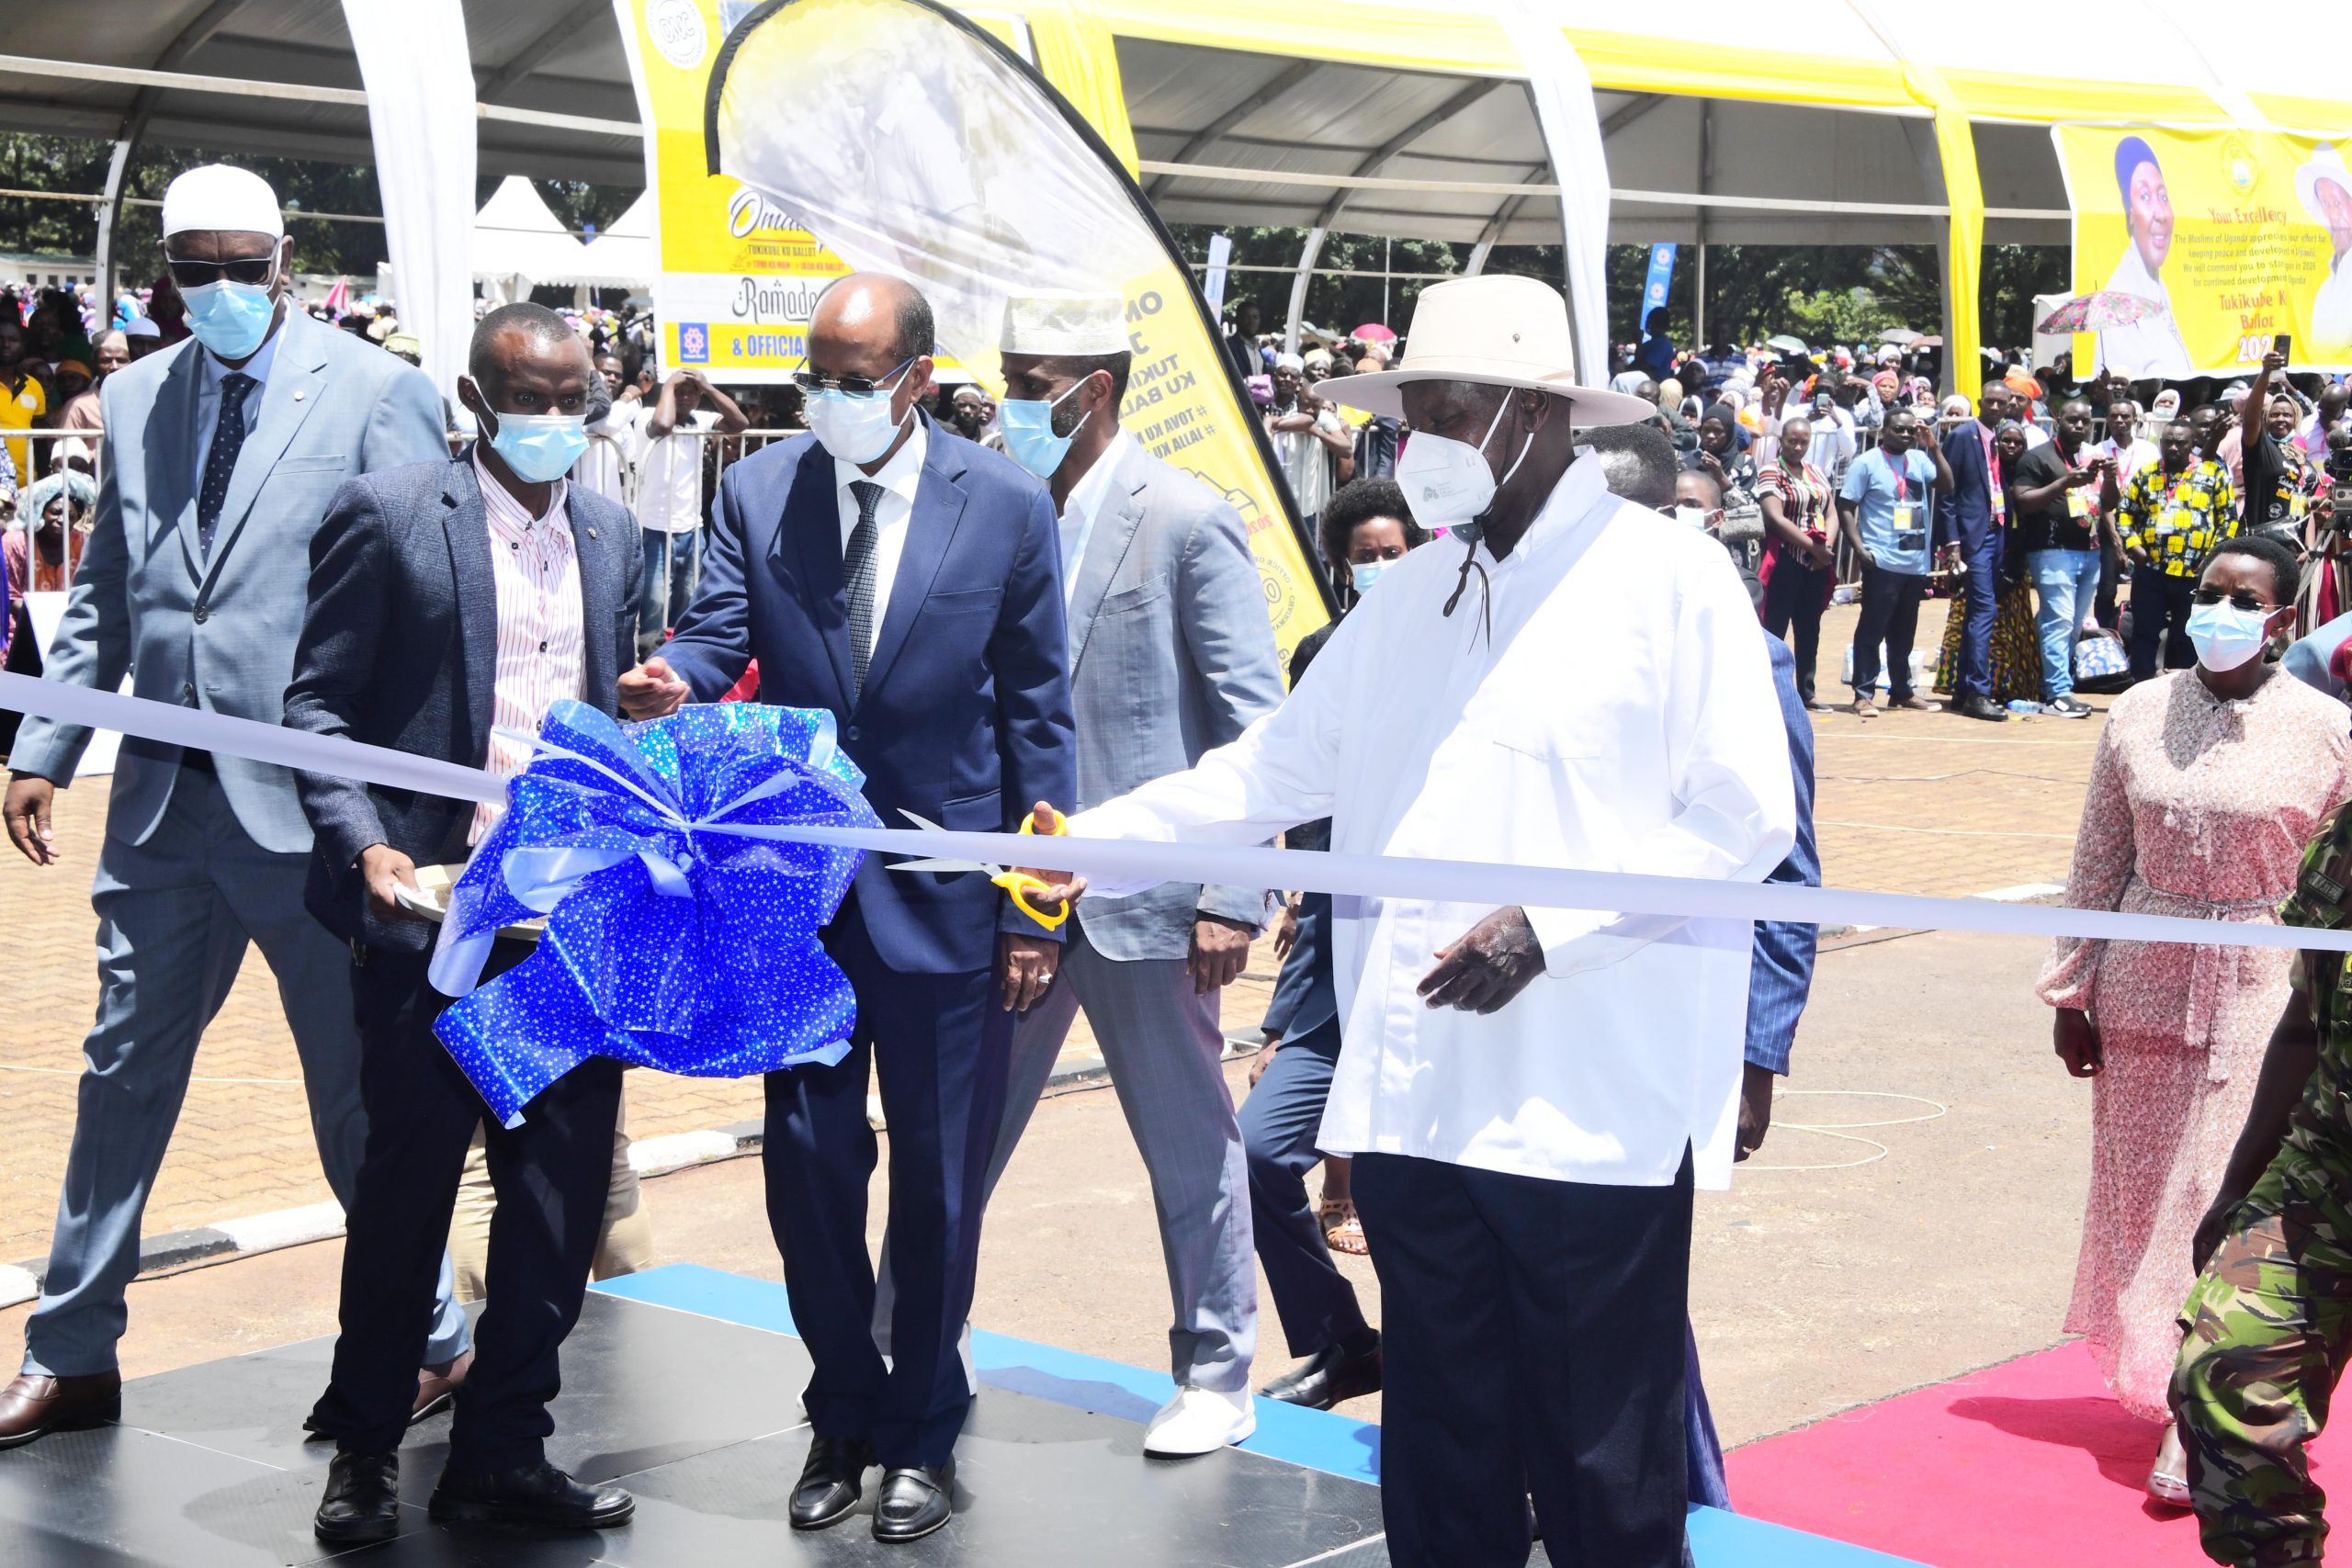 PRESIDENT MUSEVENI LAUNCHES UGANDA’S FIRST EVER ISLAMIC BANKING INSTITUTION